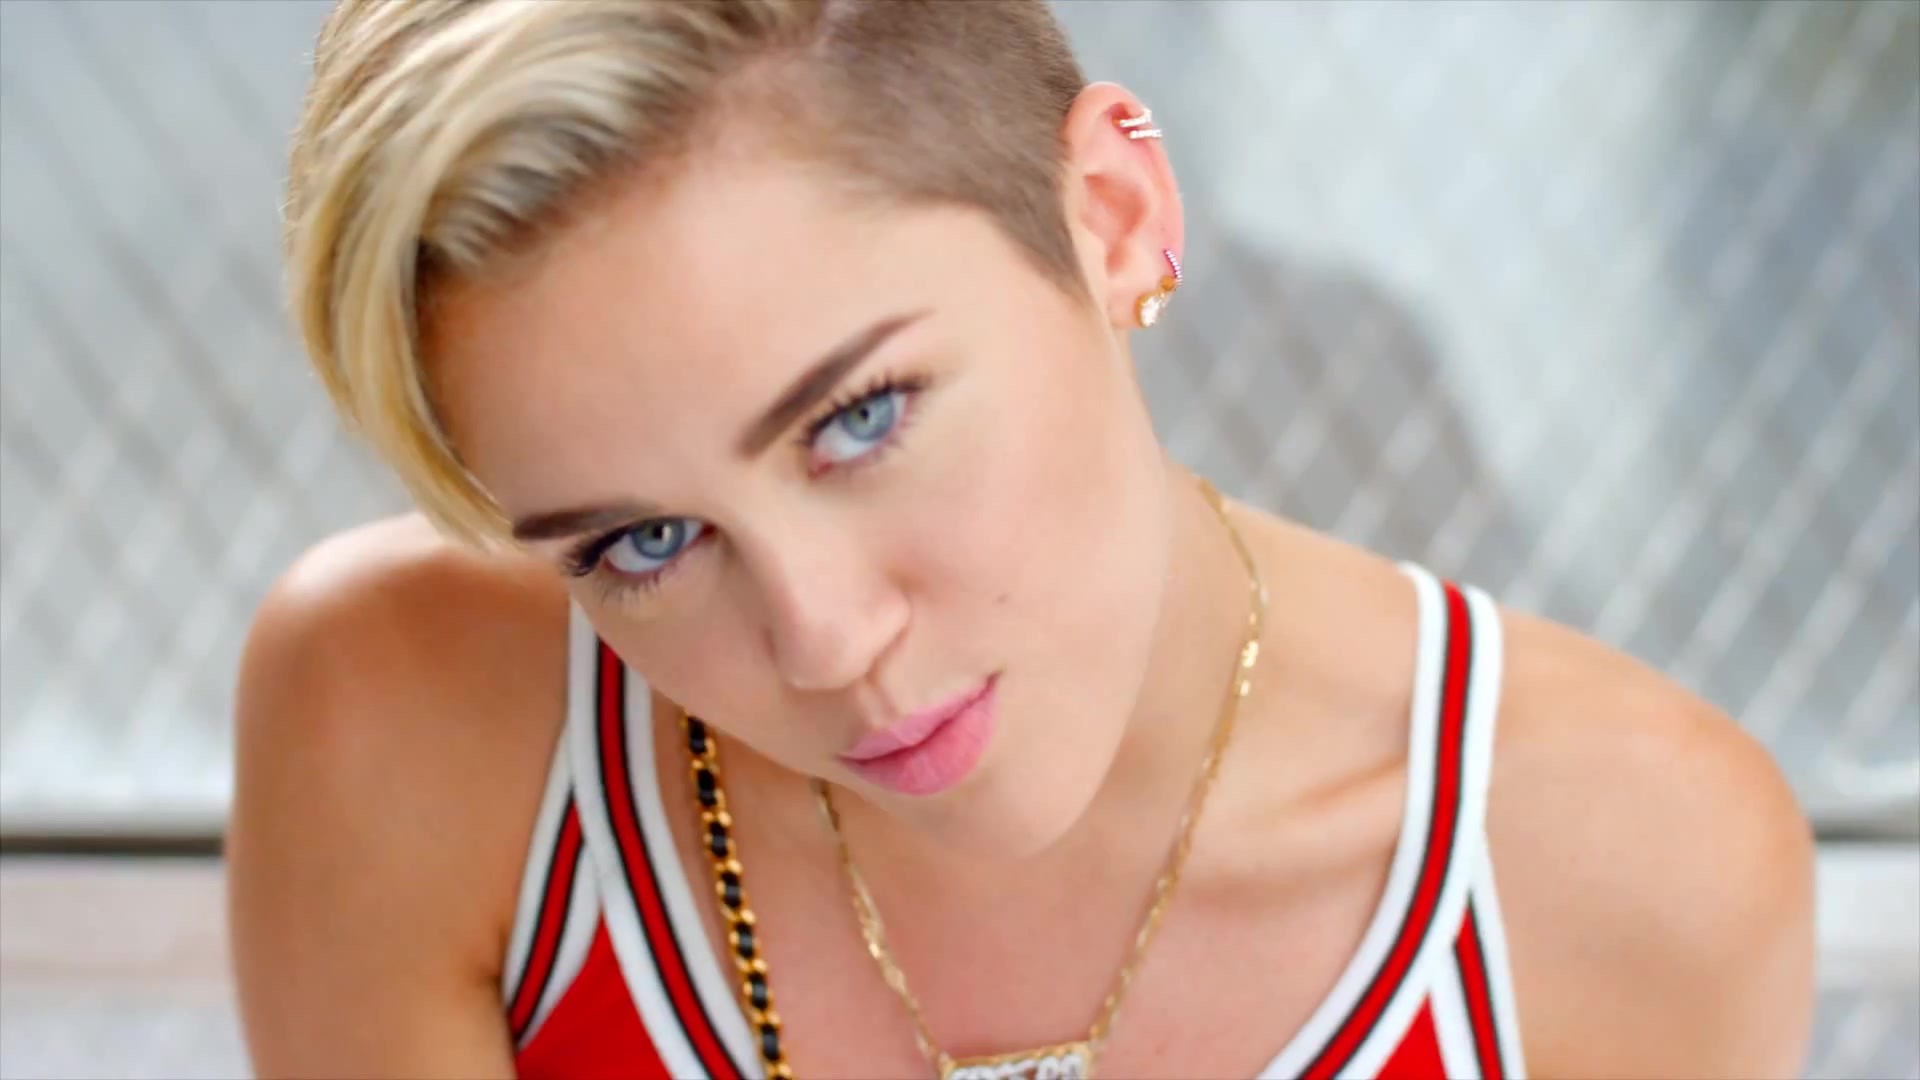 miley cyrus wallpaper,hair,face,blond,hairstyle,beauty